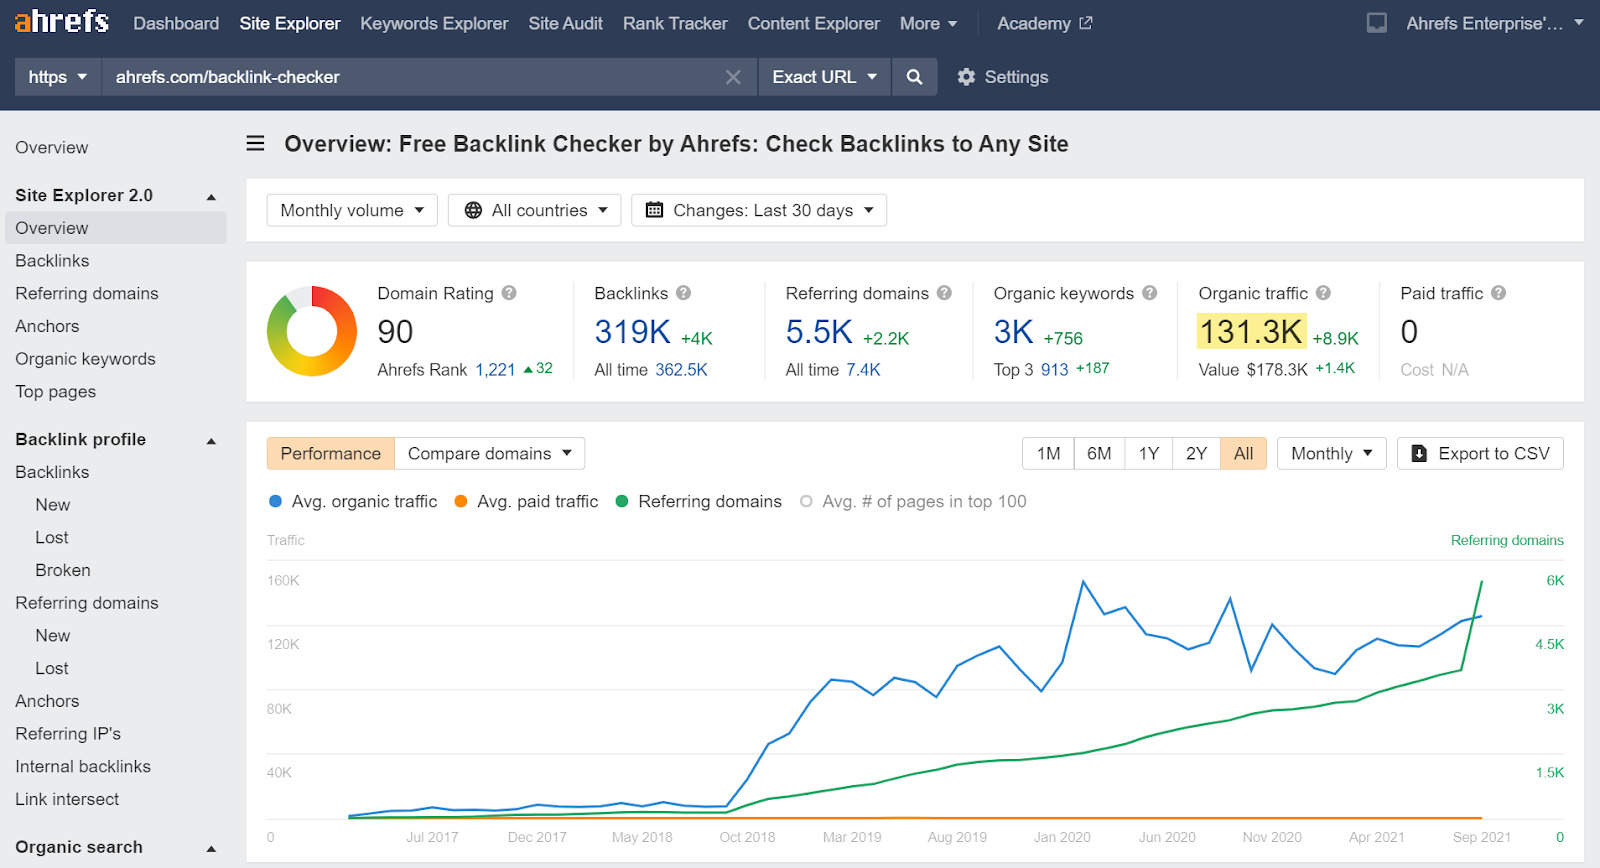 Search Ahrefs' backlink checker page on Site Explorer